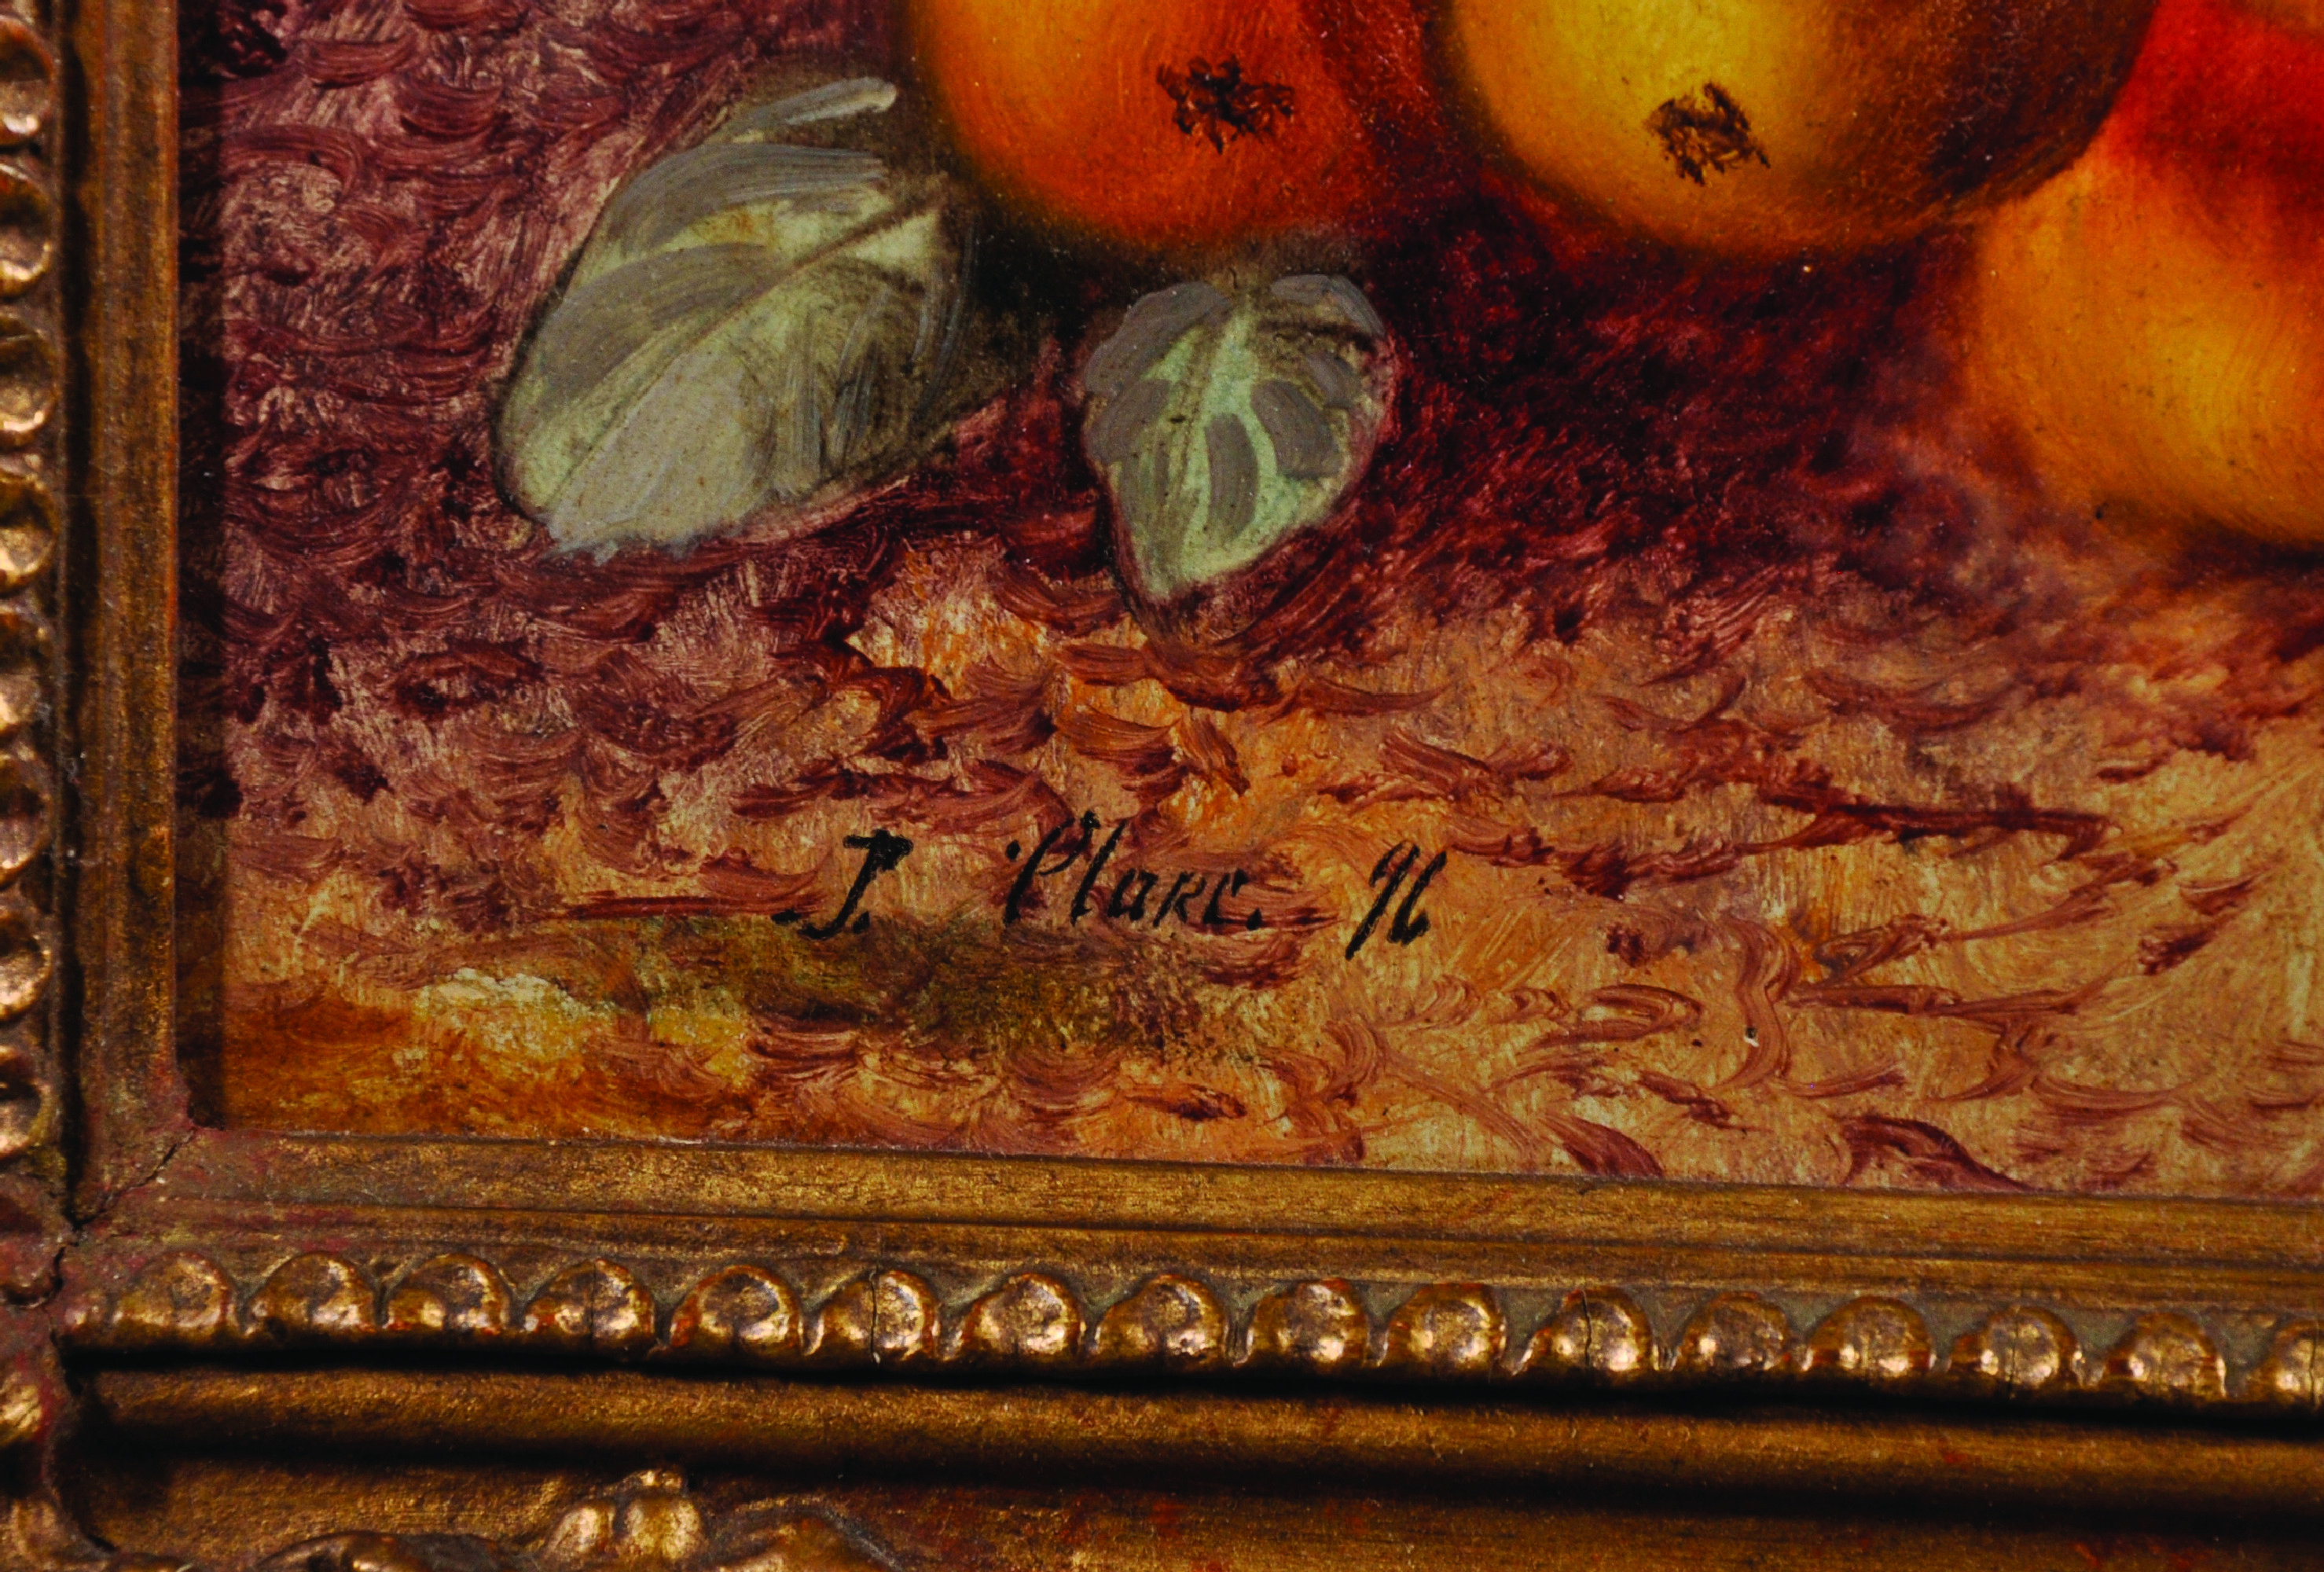 J...Clare (19th-20th Century) British. Still Life with Apples and Plums, Oil on Canvas, Signed and - Image 3 of 4